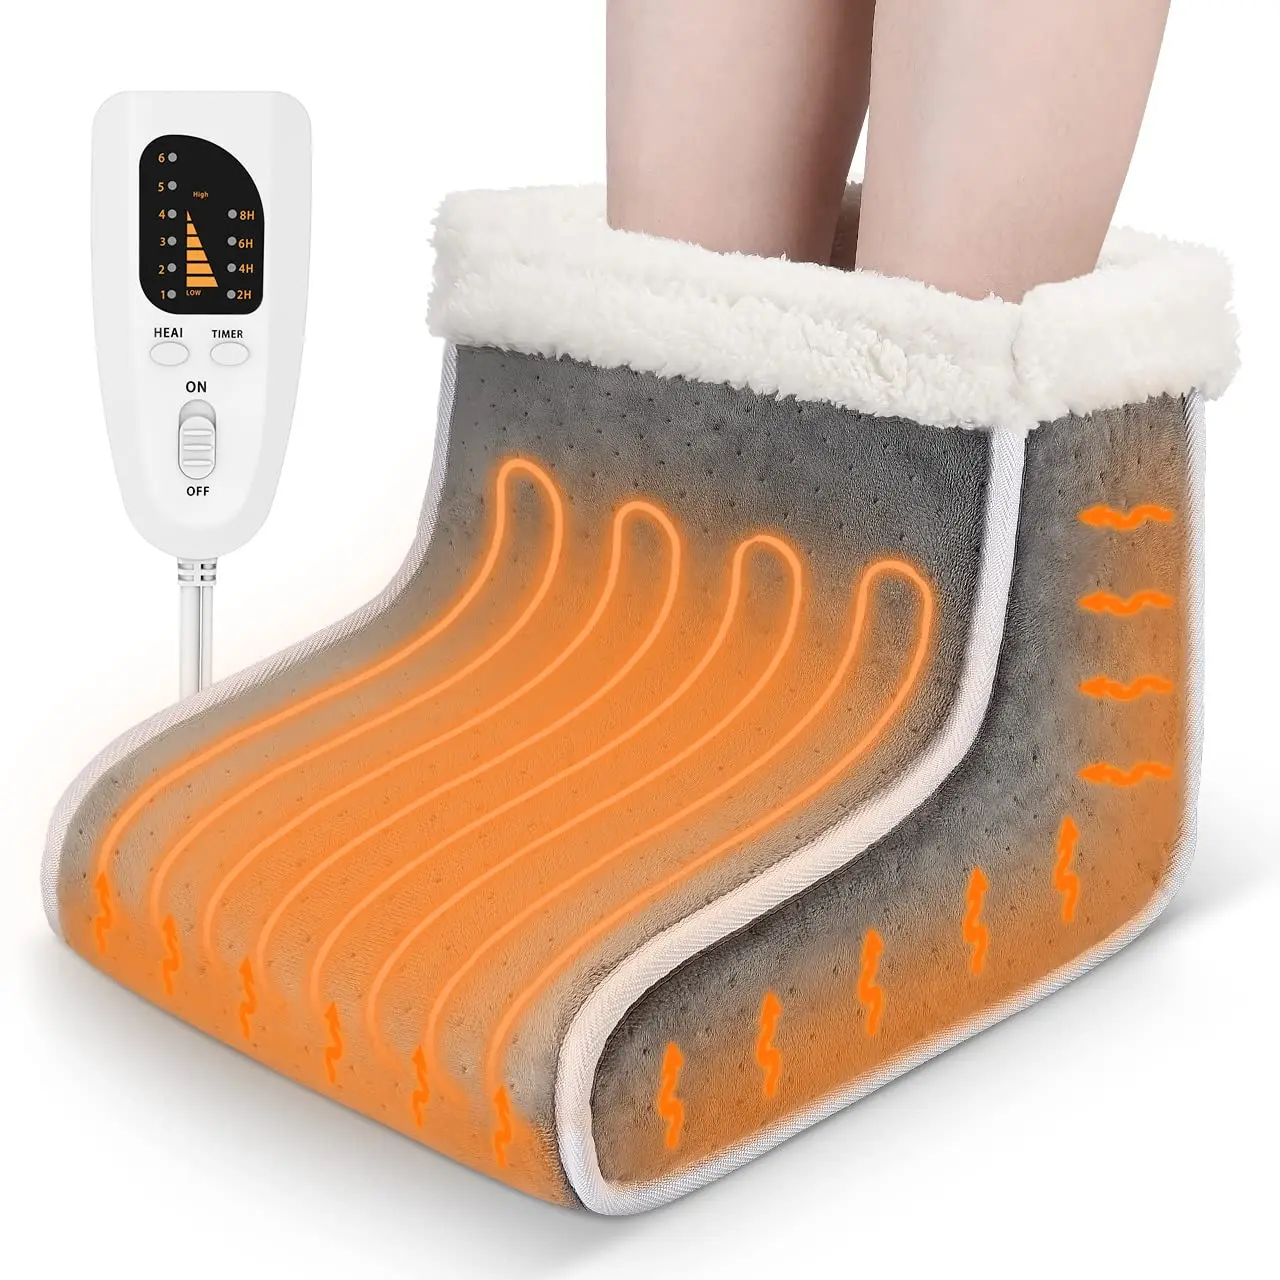 Heating Pad for Foot, Electric Heated Foot Warmer, Soft Foot Warmer Boots, Removable and Washable, 6-Level Heating and 4-Level T